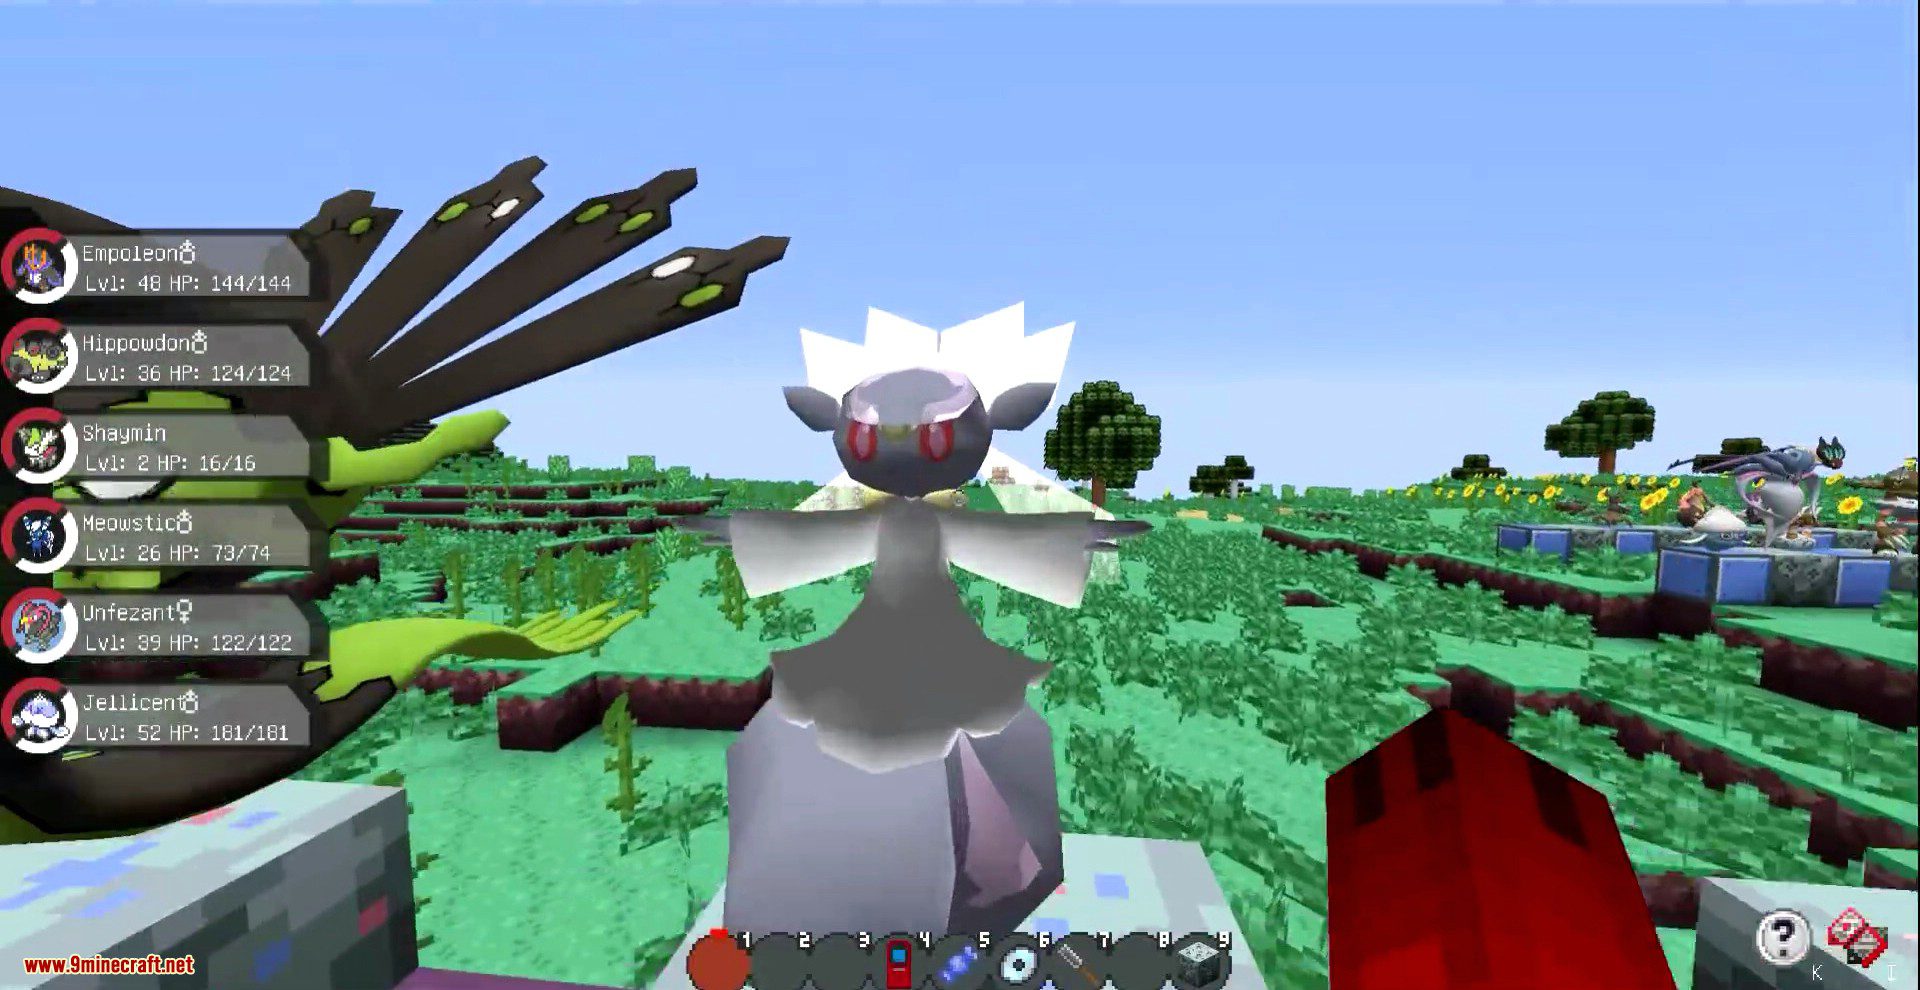 HOW TO FIND CELESTEELA IN PIXELMON REFORGED - MINECRAFT GUIDE - VERSION  9.1.5 